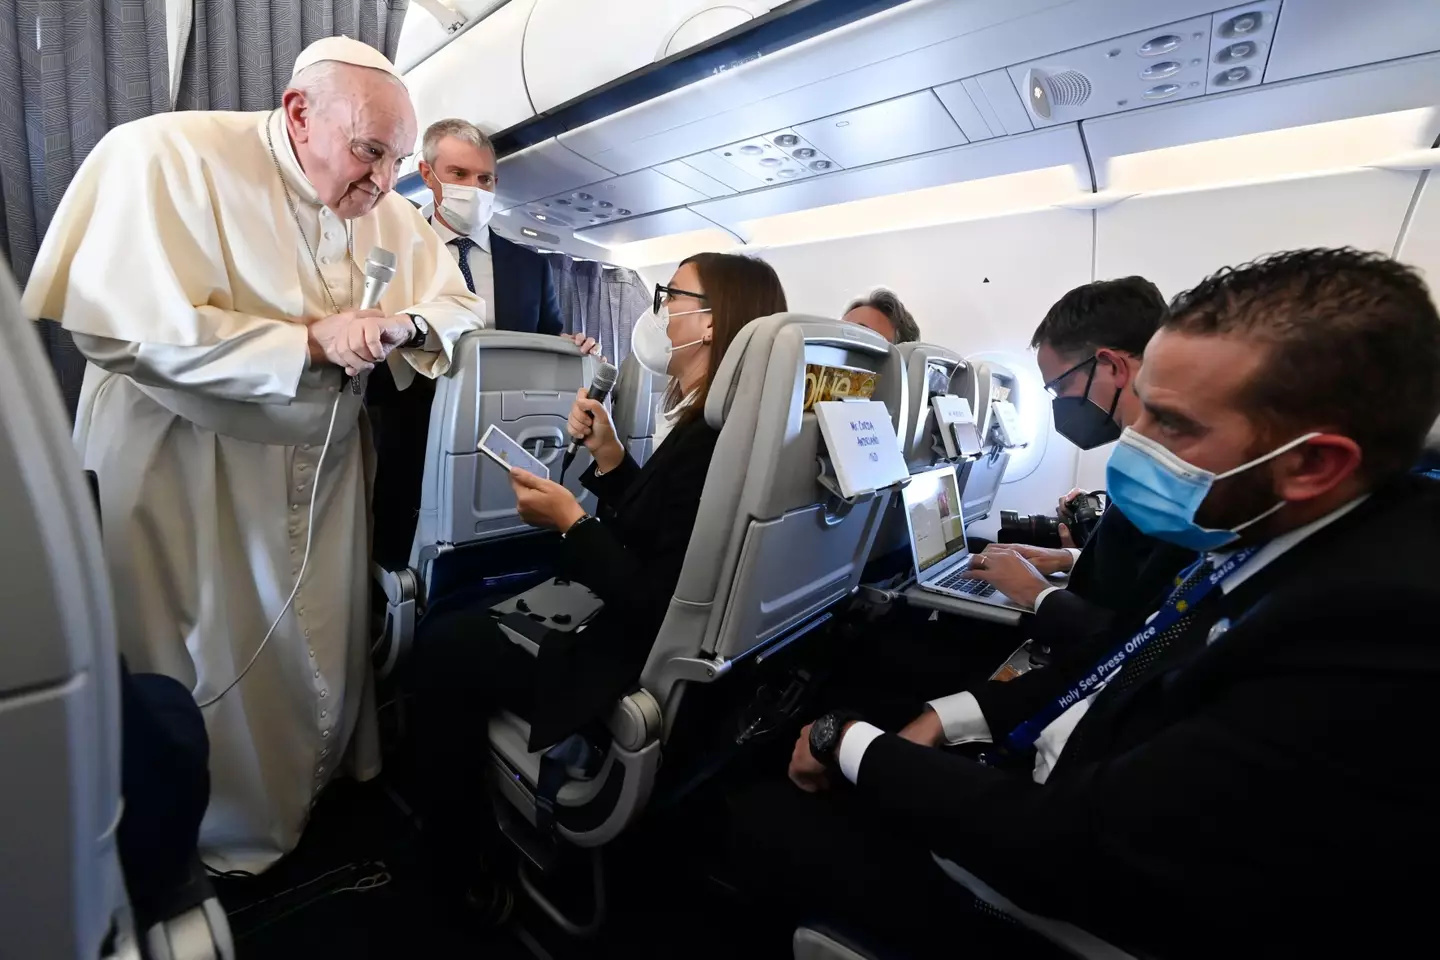 The Pope took questions on his flight back to Rome.